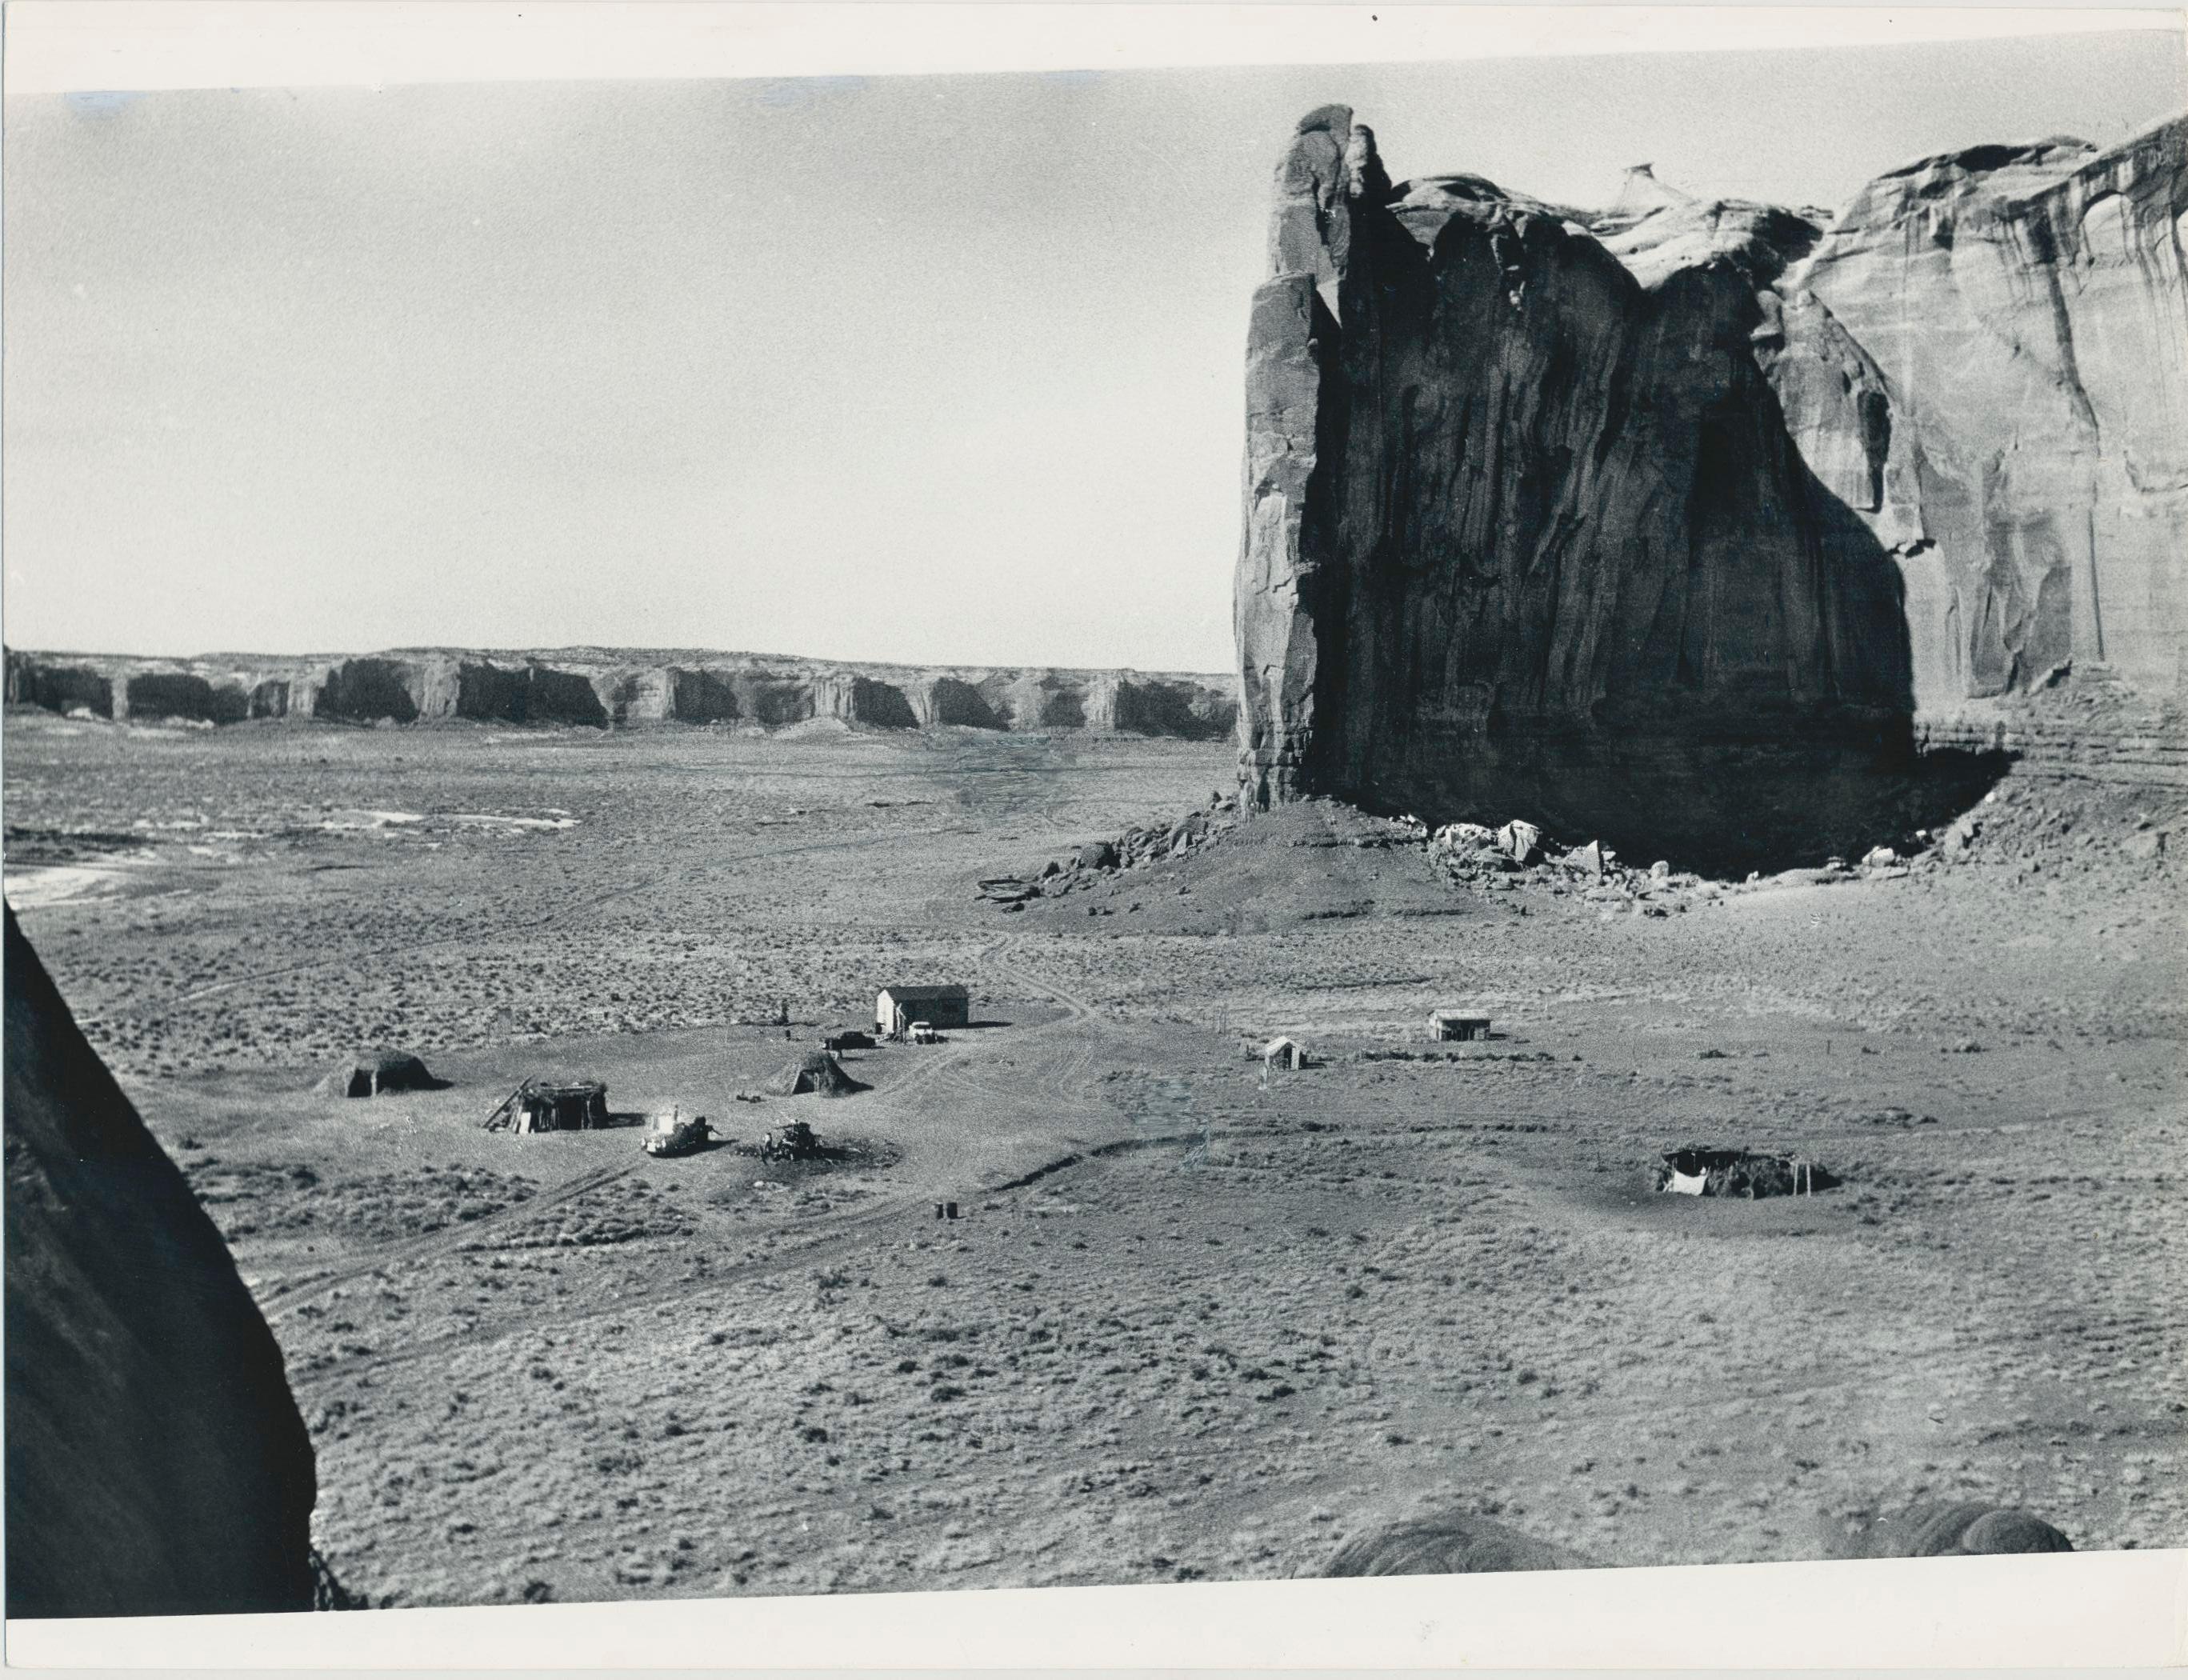 Erich Andres Black and White Photograph - Monument Valley, Utah/Arizona, Black and White, USA 1960s, 17, 1 x 23, 1 cm